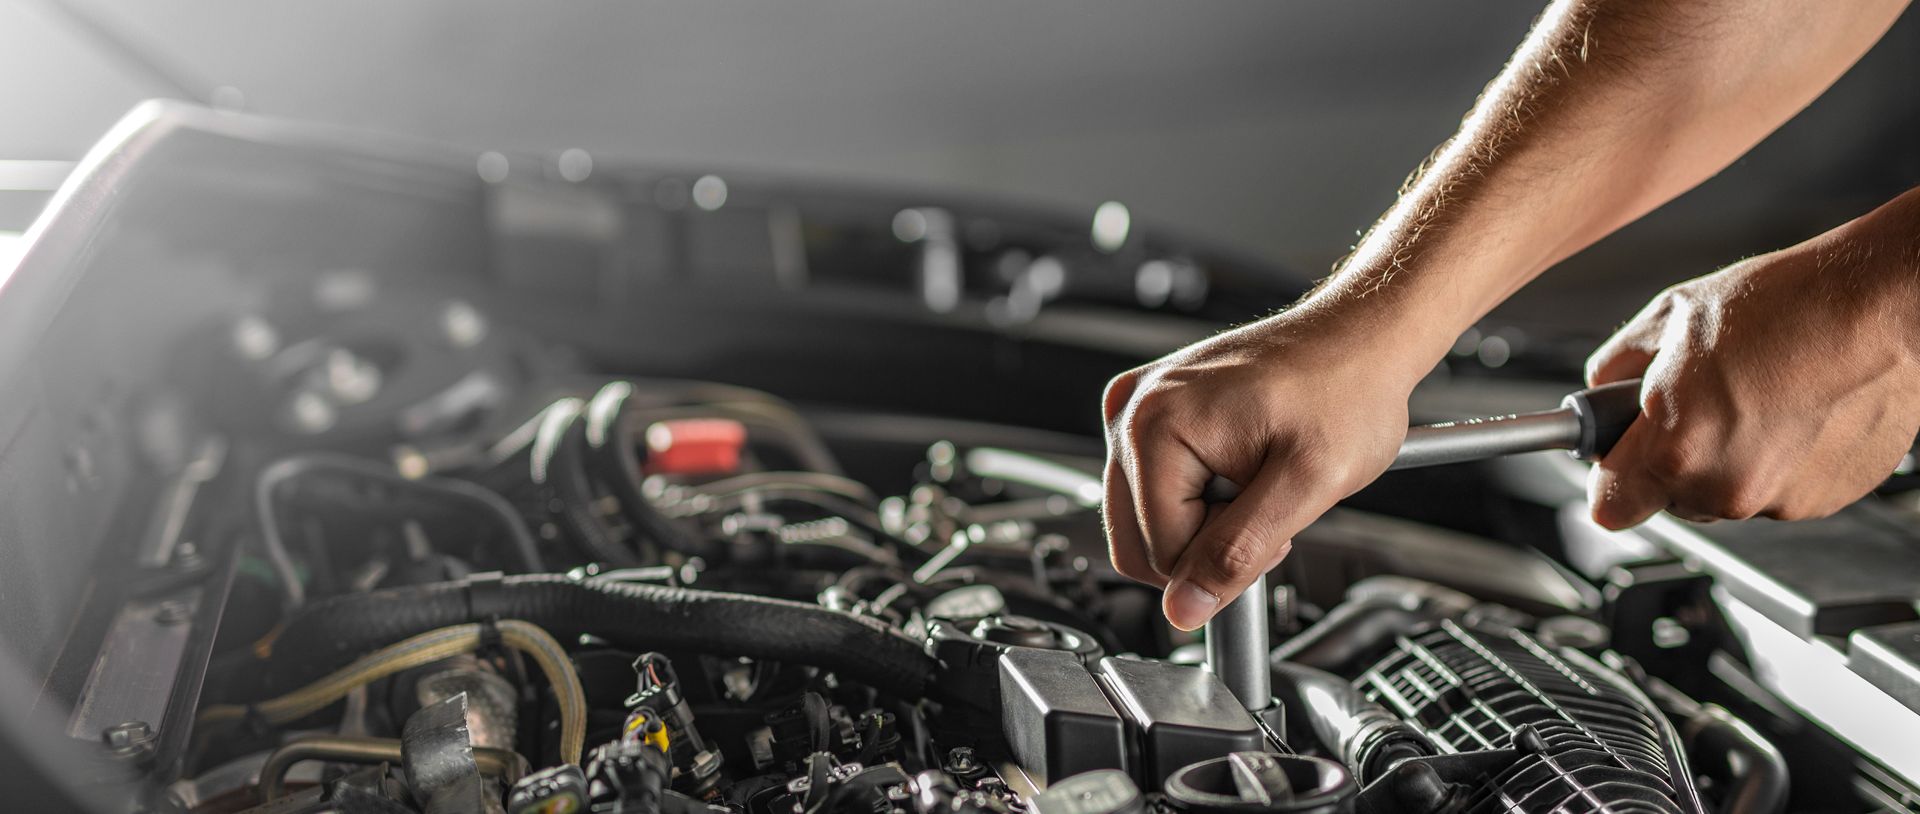 What Are Engine Diagnostics & Are They Important? | MMR Automotive
